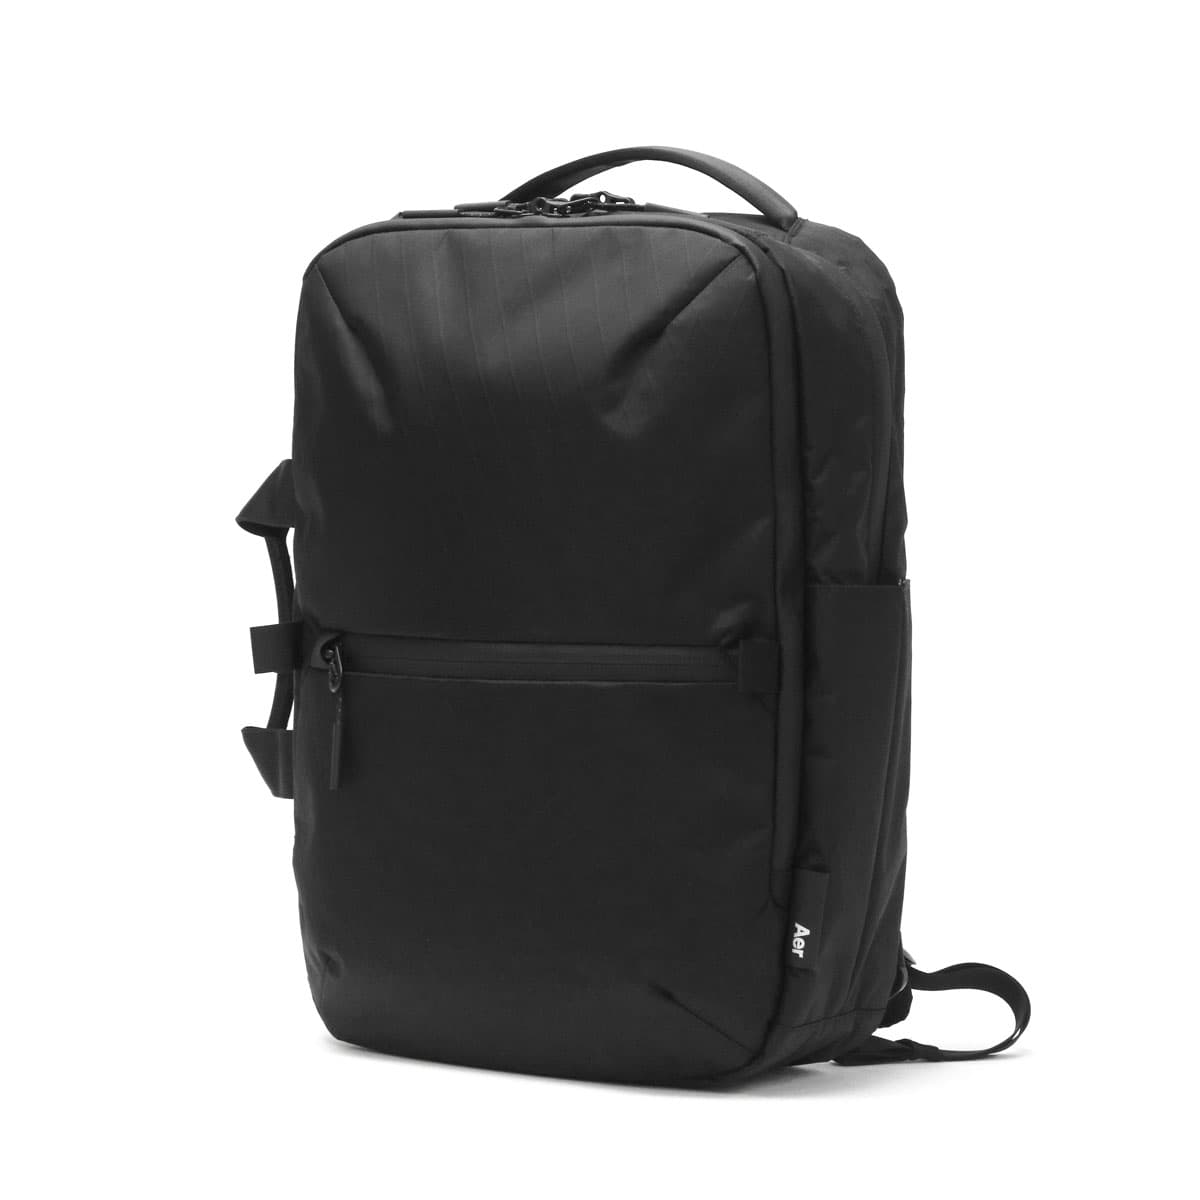 Aer エアー Travel Collection Flight Pack 3X-Pac 3wayバックパック 